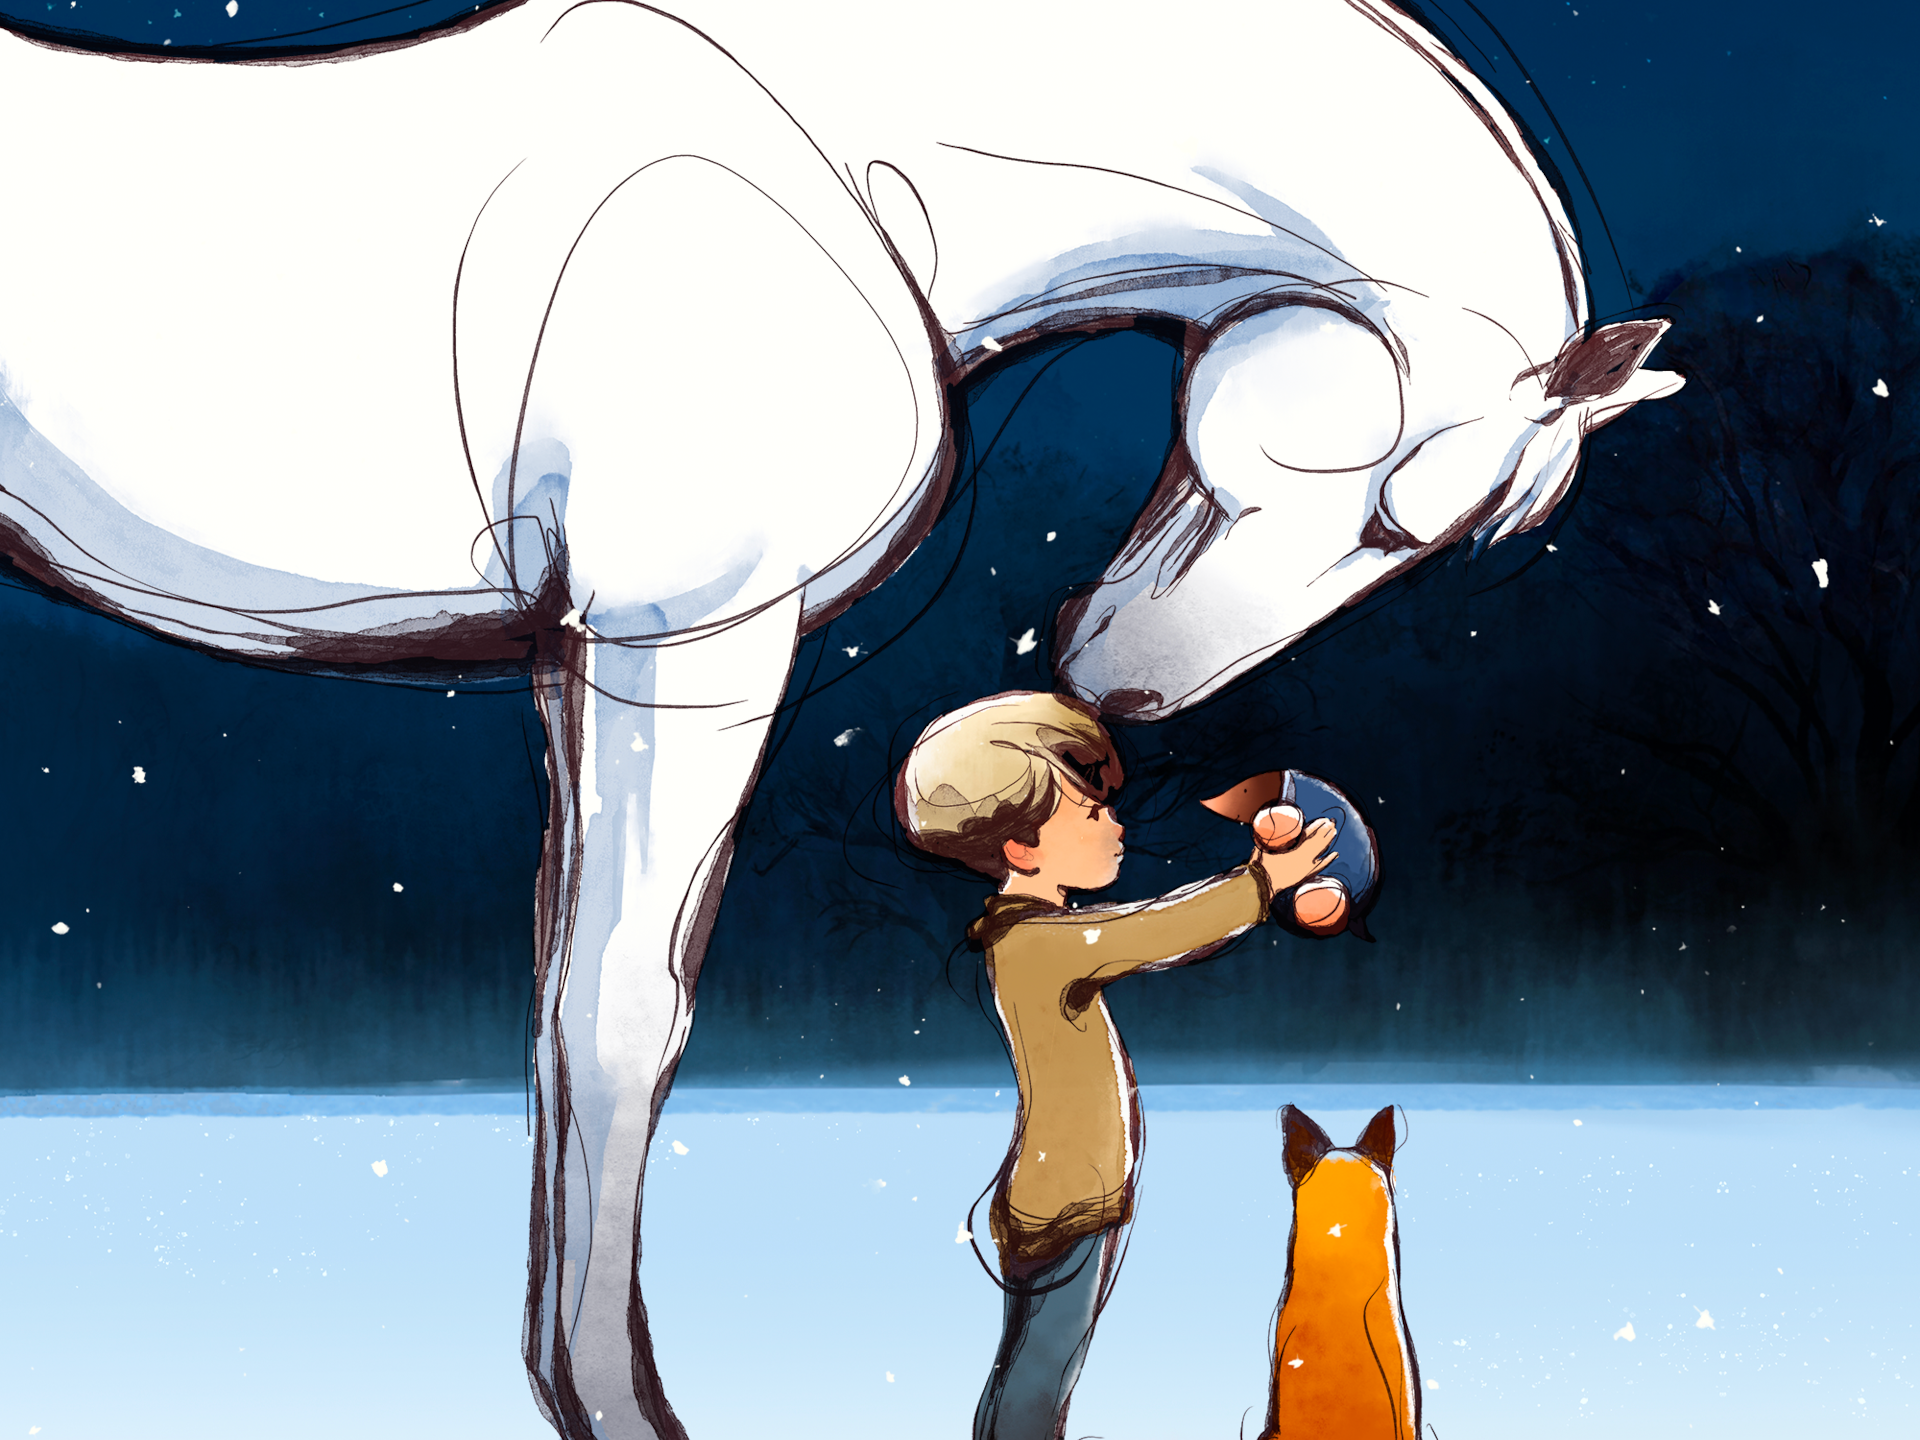 The fox and the mole. The boy the Mole the Fox and the Horse. Мальчик Крот Лис и конь. Мальчик Крот Лис и лошадь 2022. The boy the Mole the Fox and the Horse pdf.